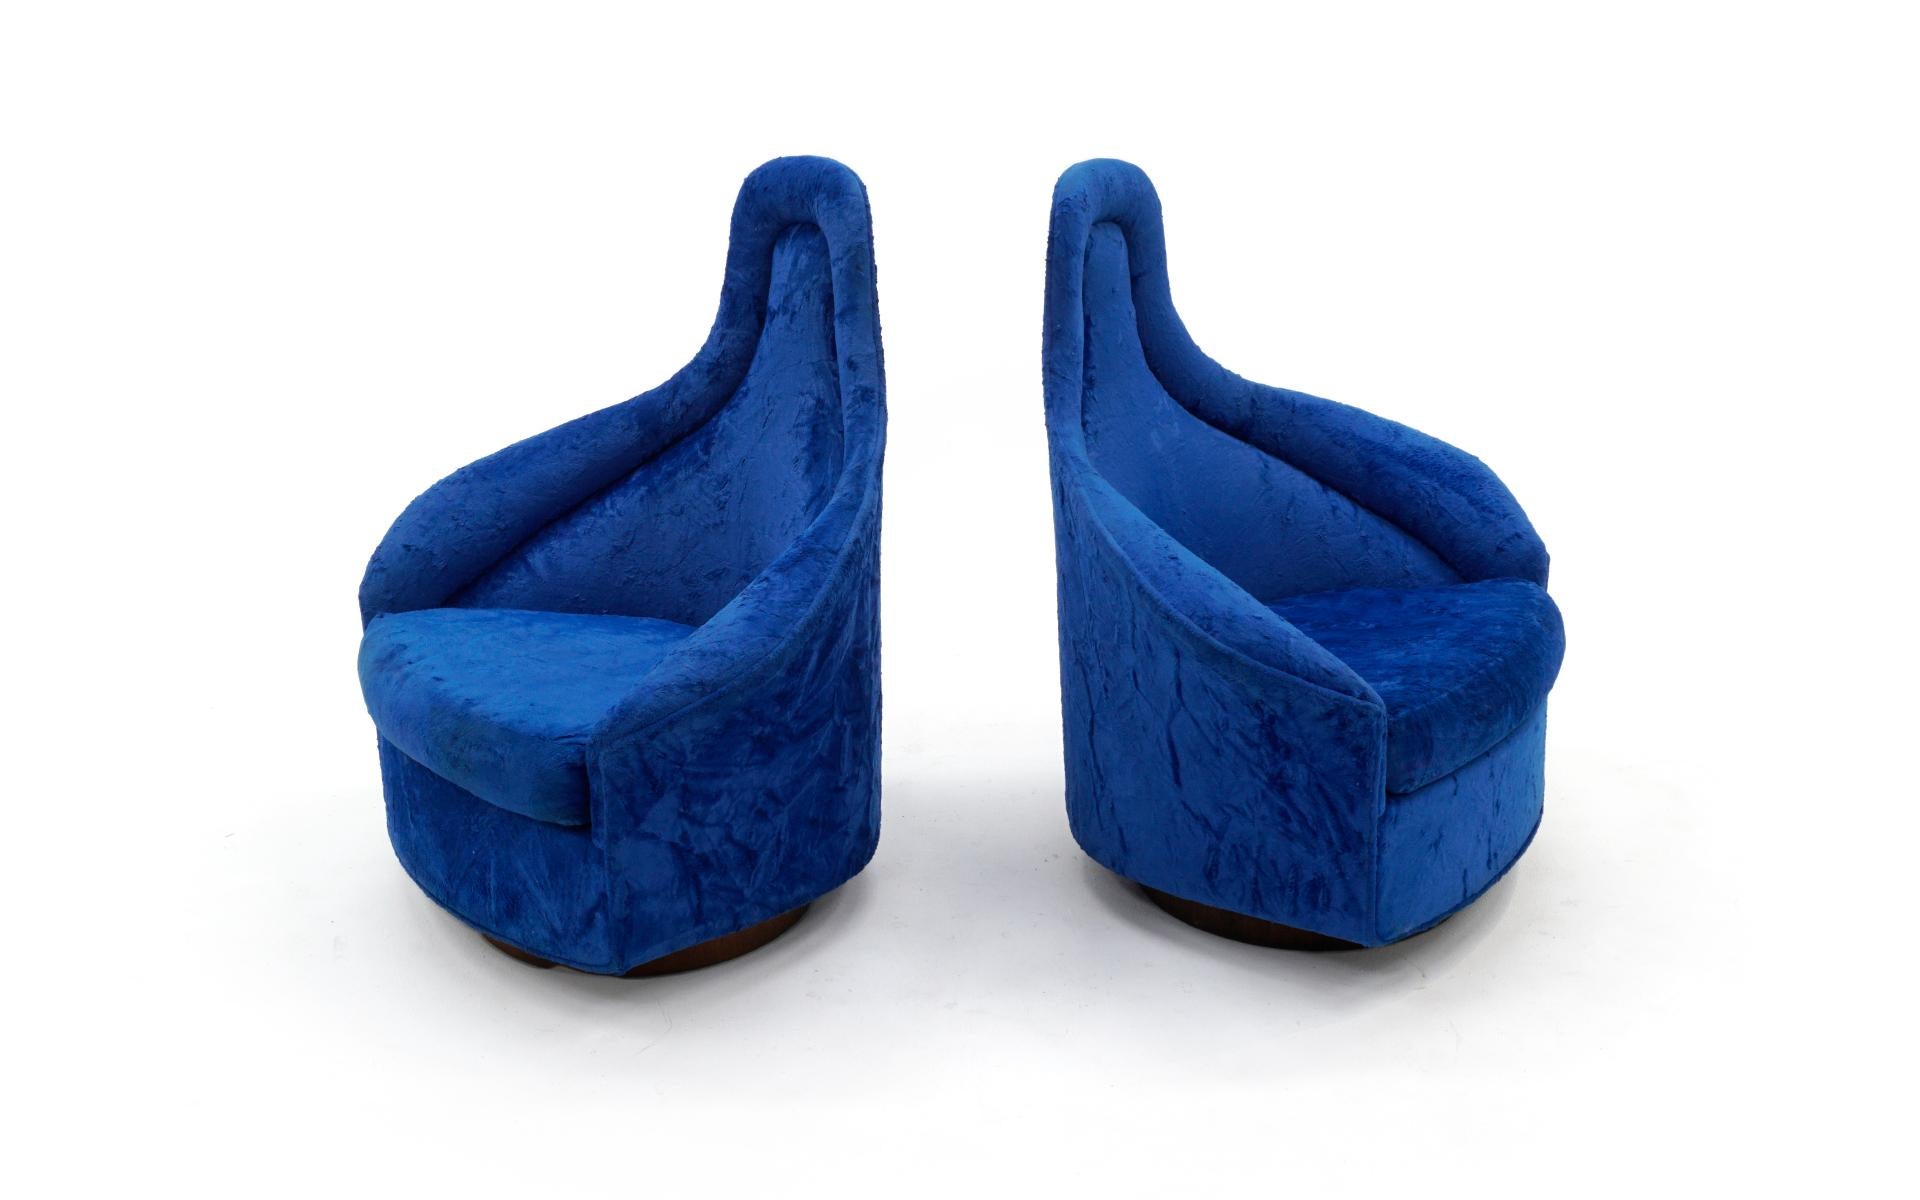 Pair of high back swivel lounge chairs designed by Adrian Pearsall for Craft Associates. These are in the original custom ordered blue crushed velvet. This was not a stock upholstery job, but a special order from Craft Associates by the original